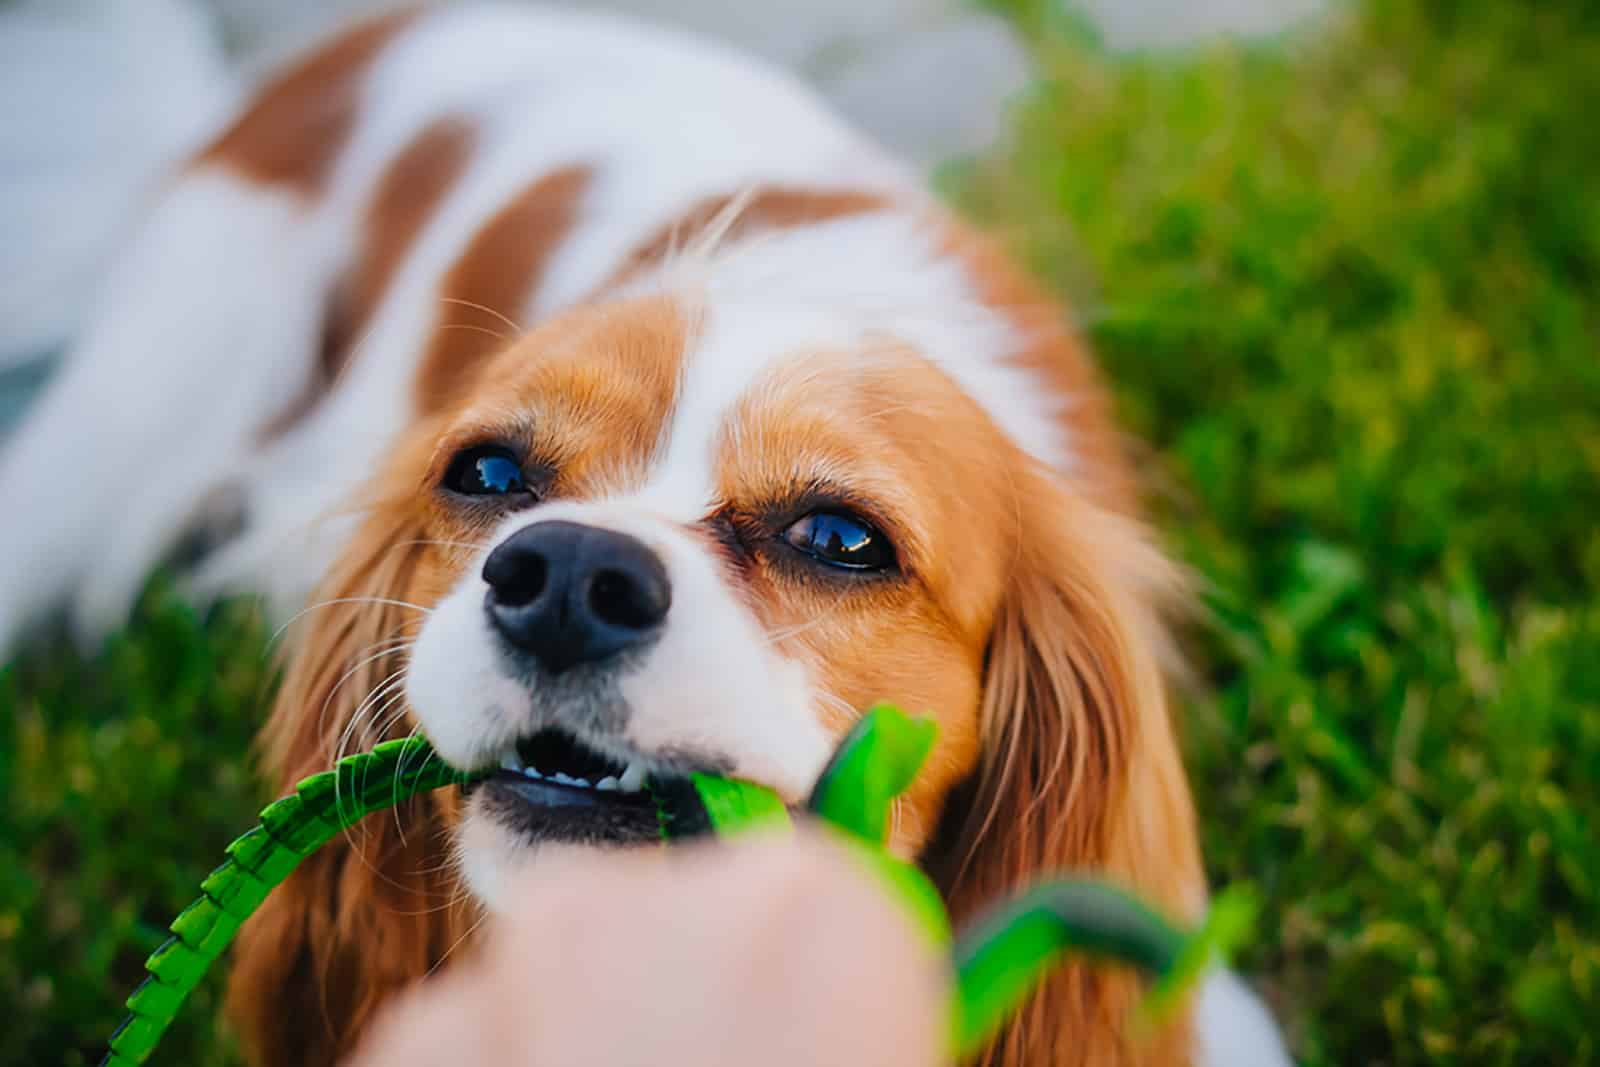 cavalier king charles spaniel playing with a toy